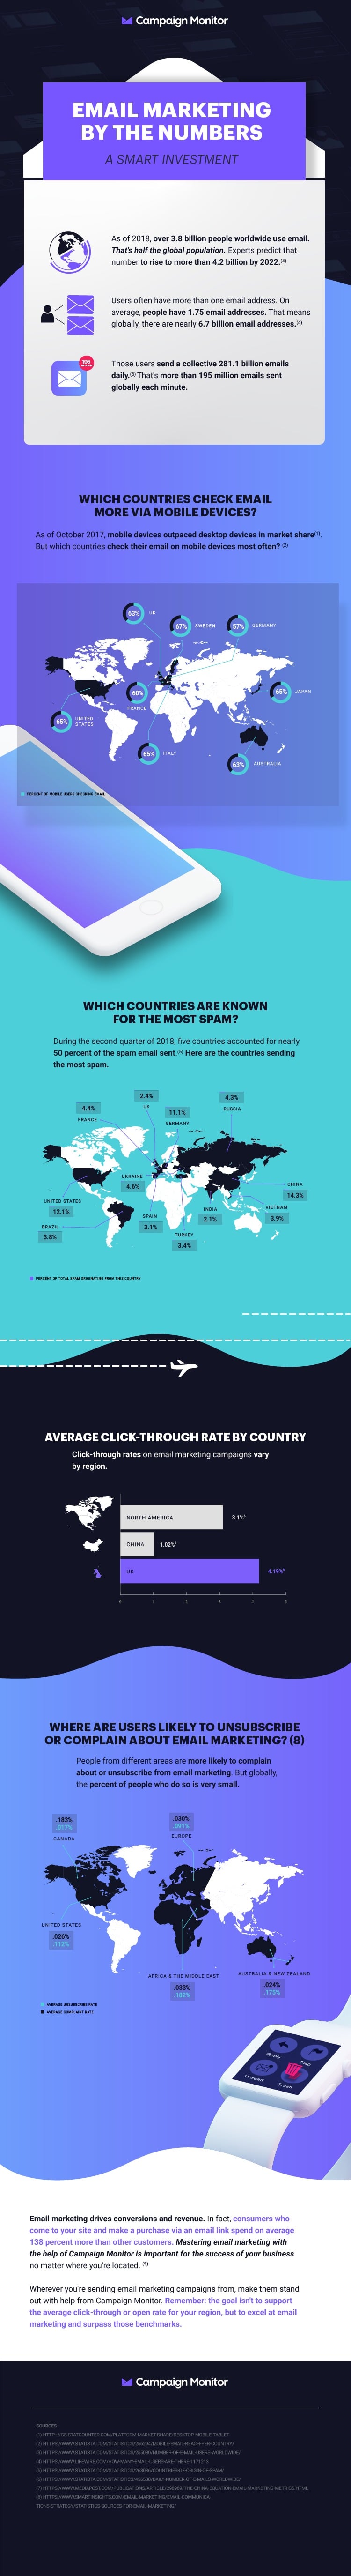 email marketing by the numbers infographic